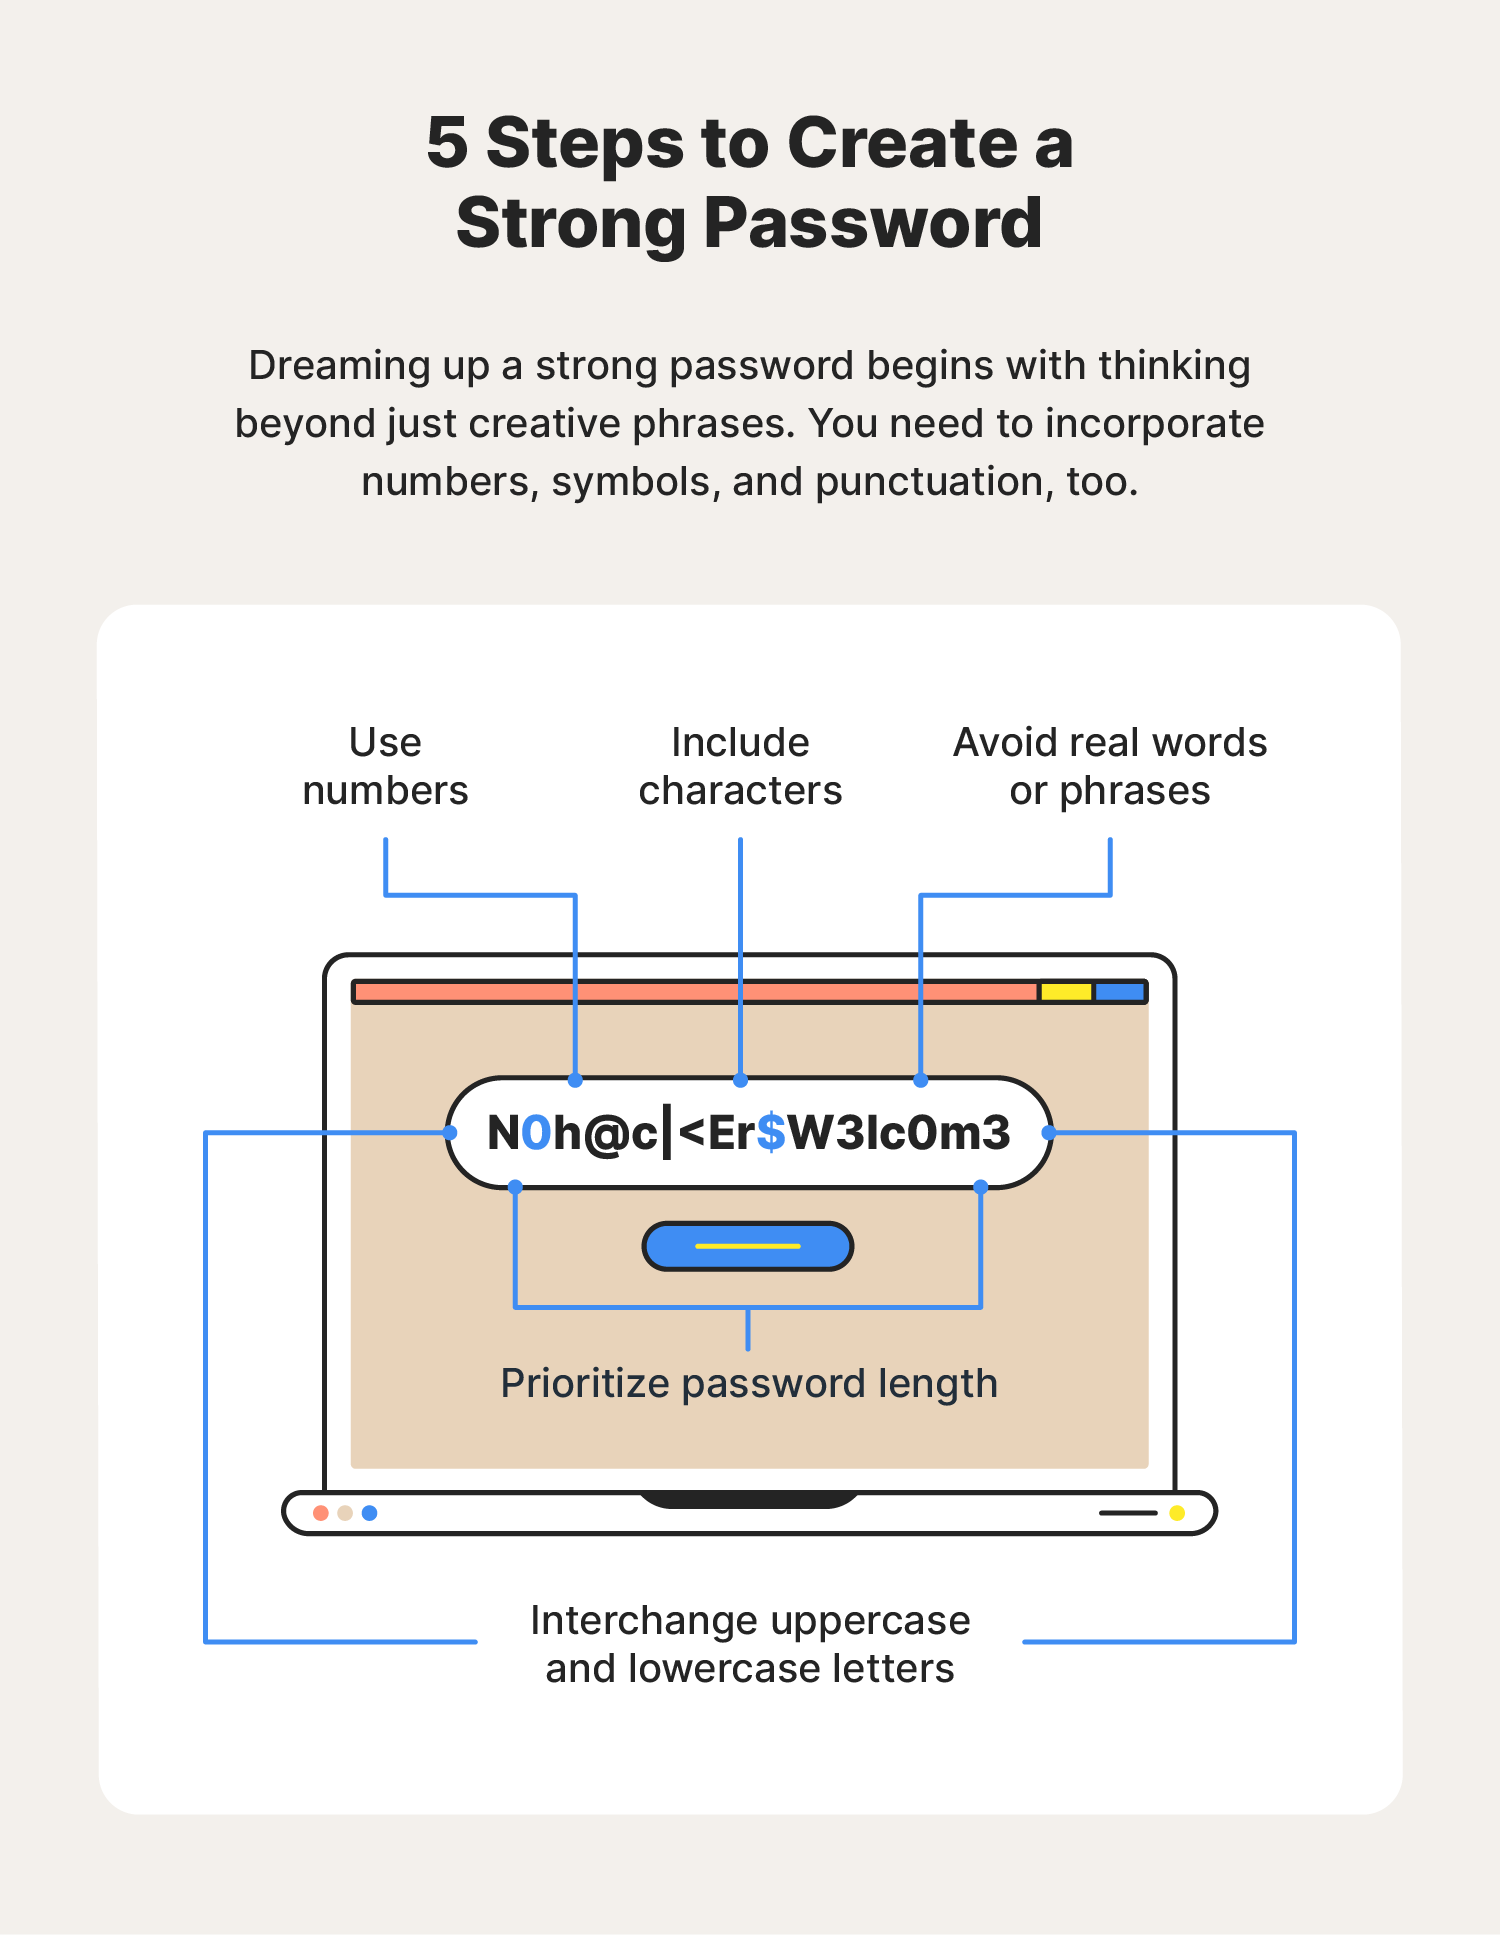 An example of a strong password is accompanied by password security best practices that can help protect online accounts from hackers.